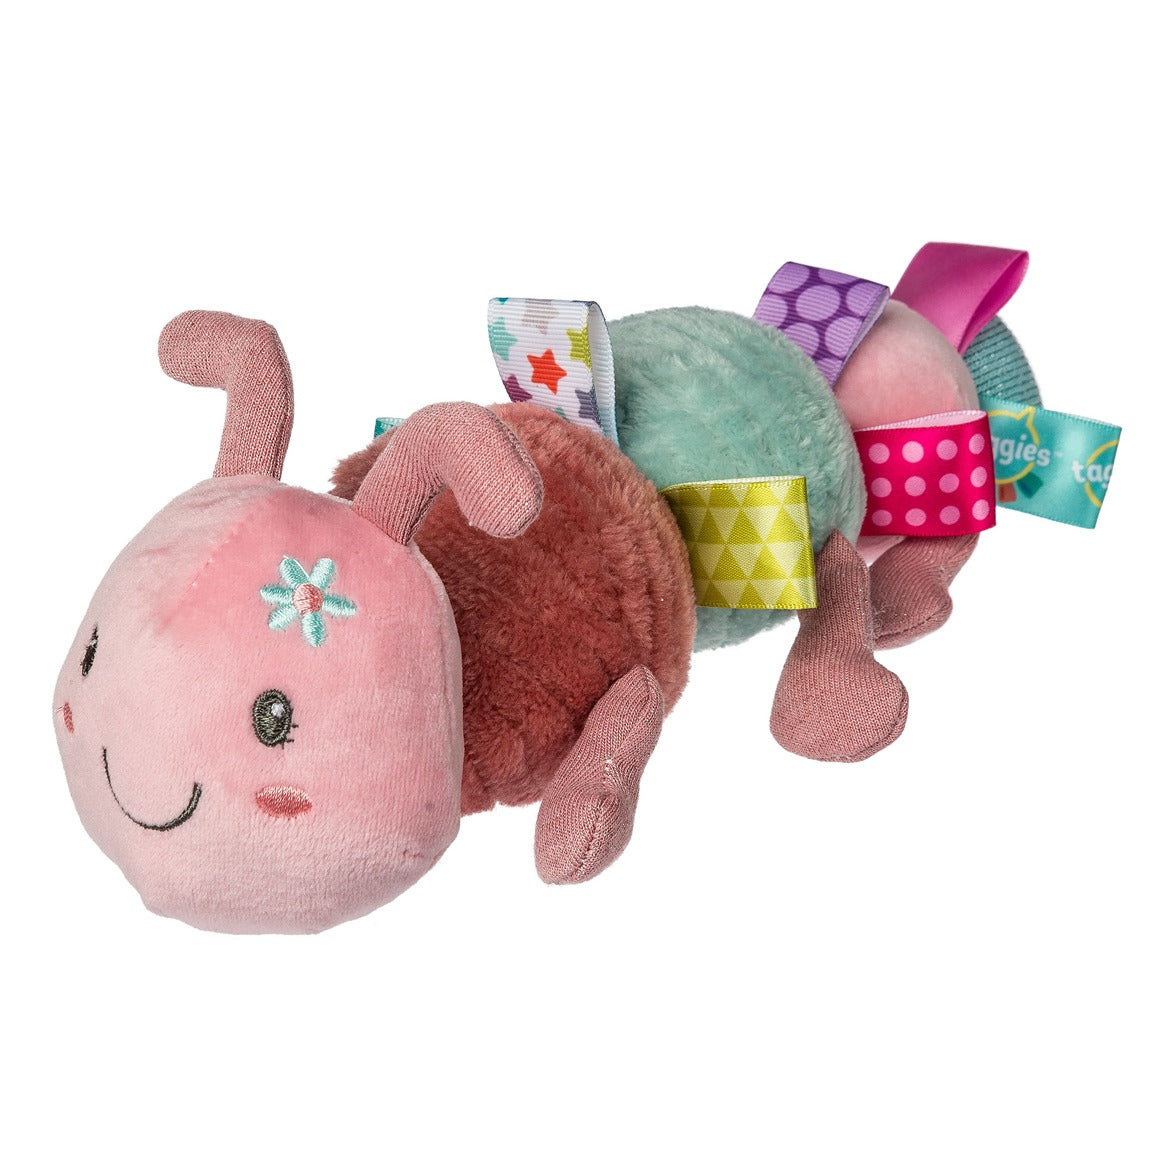 Caterpillar soft toy with mutli-coloured taggies